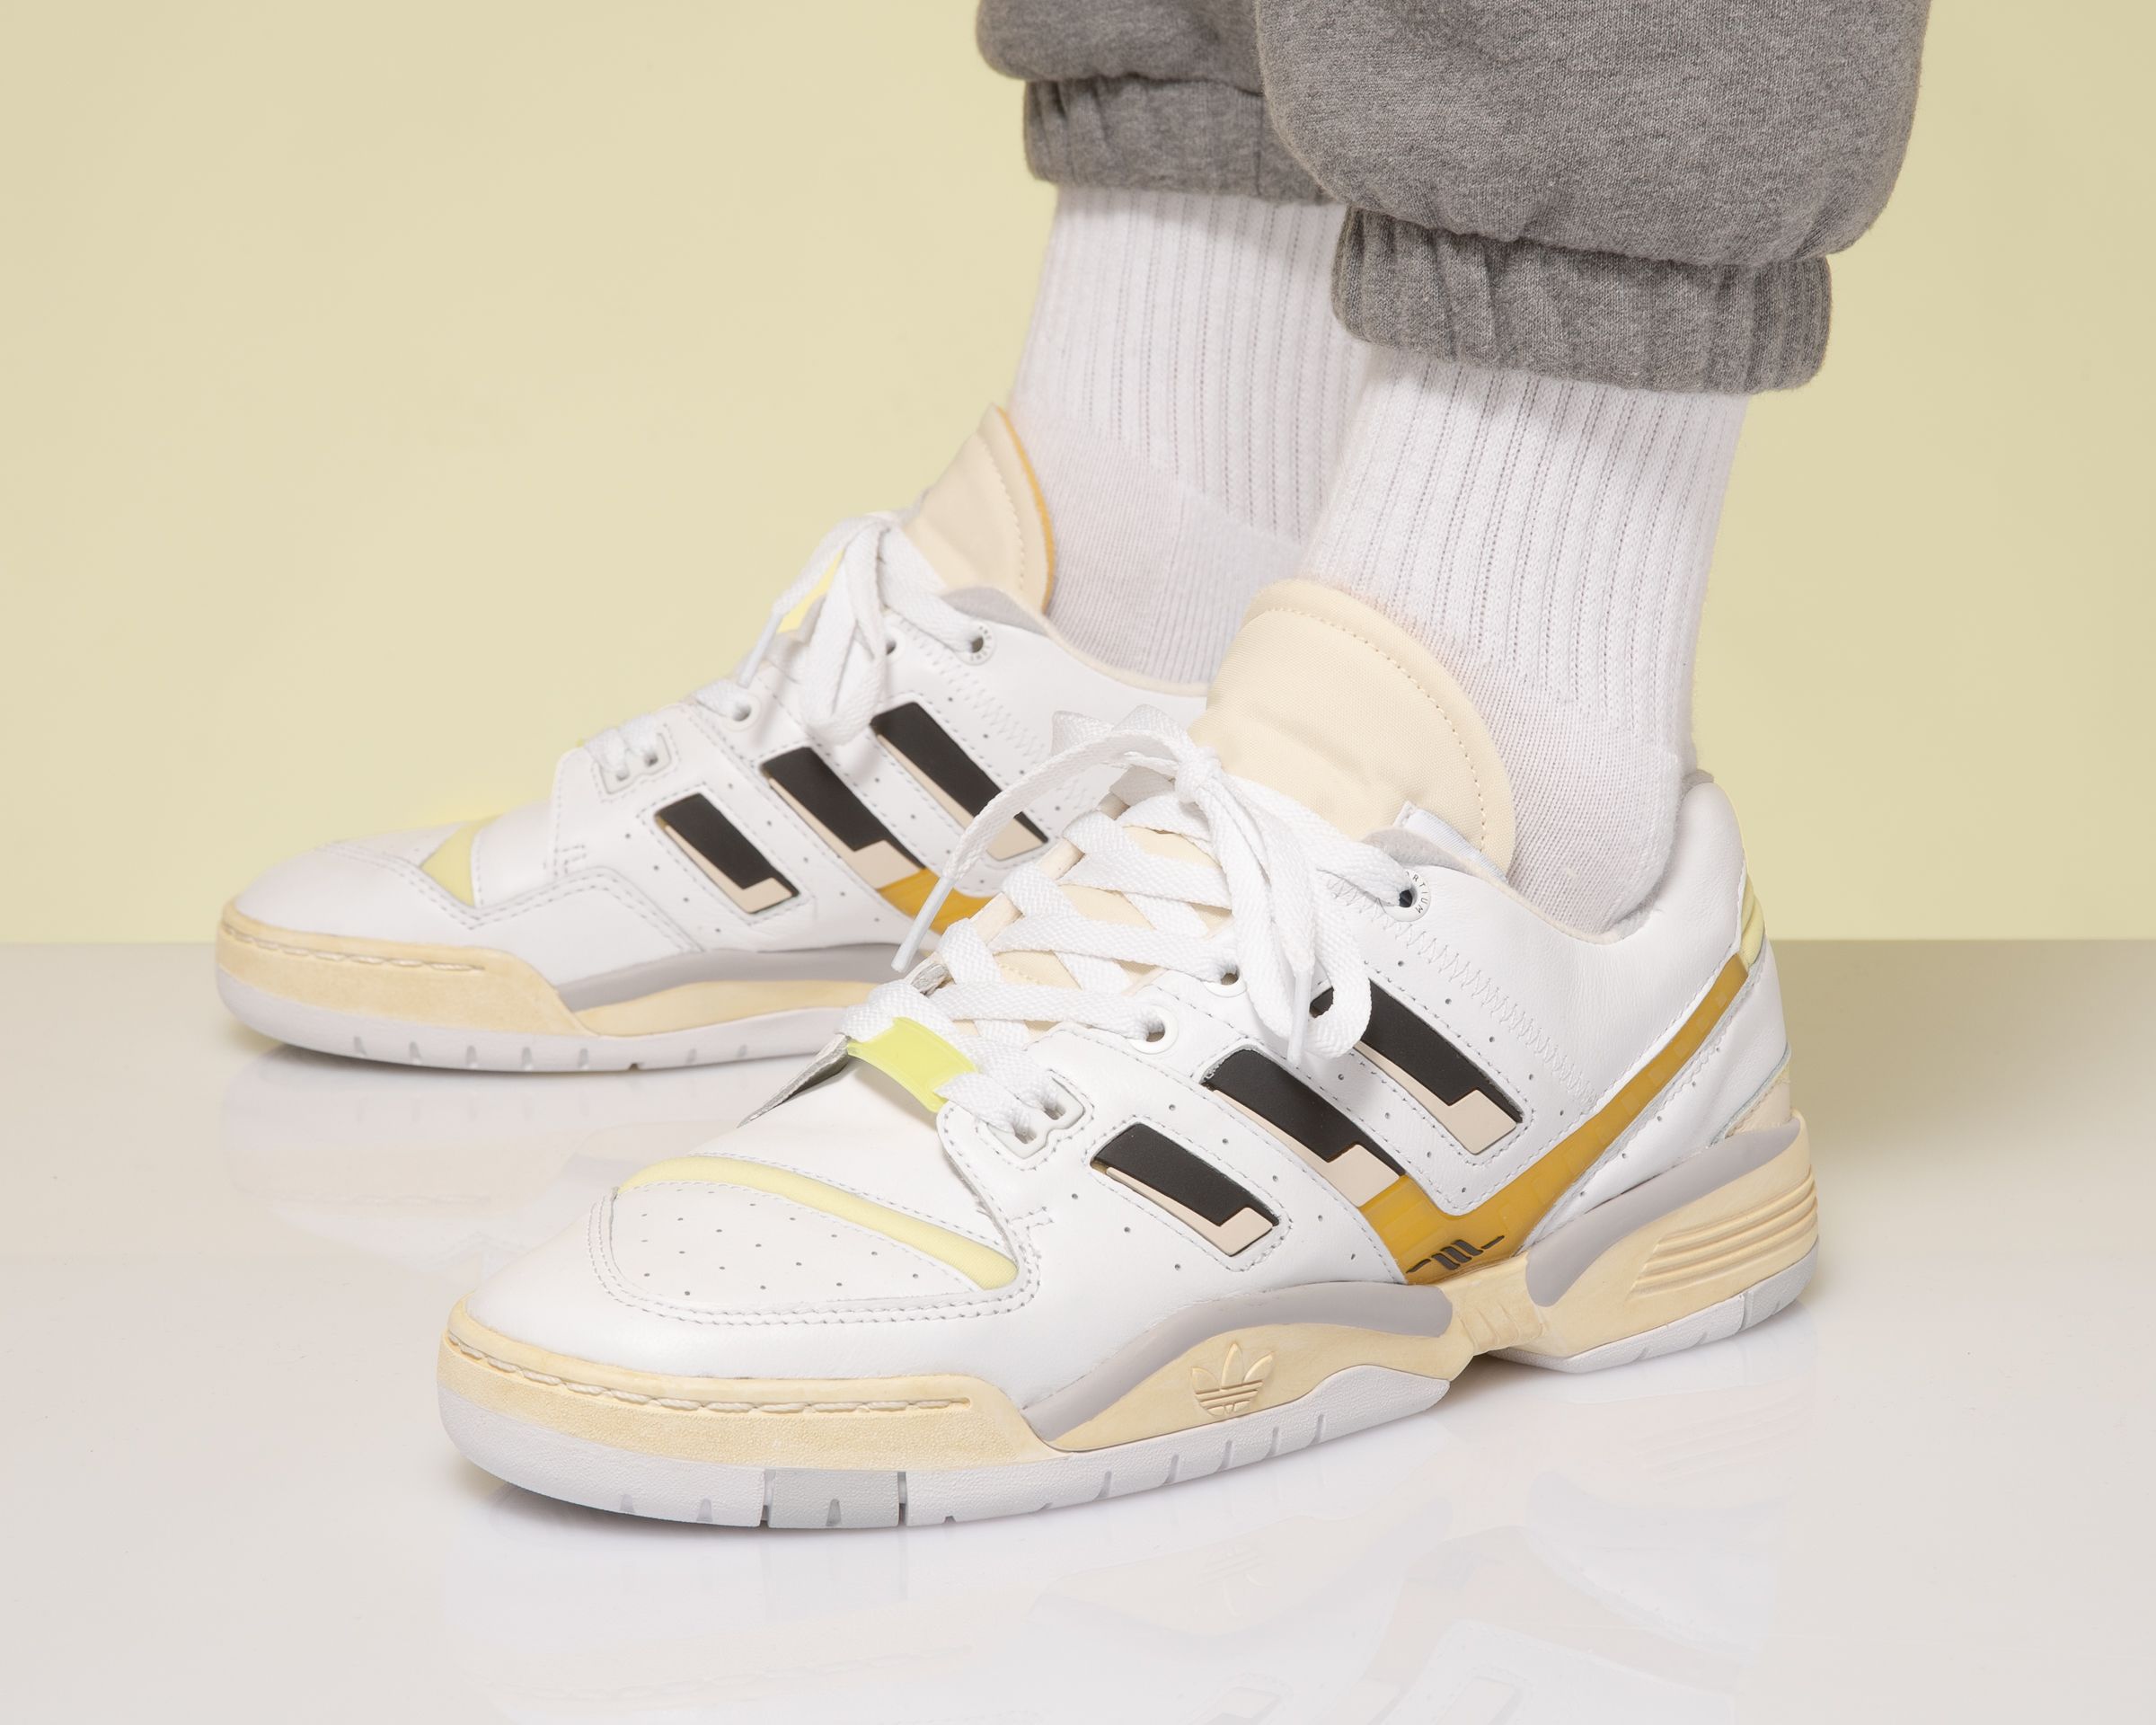 Titolo on Twitter: "coming SOON 🎾 Highs And Lows x Adidas #Consortium  Torsion #Edberg "Footwear White/Core Black/Blush Yellow" will release  Saturday, 28th September online 0.00AM CEST ➡️ https://t.co/NR79CufuvL UK  6.5 (40) -